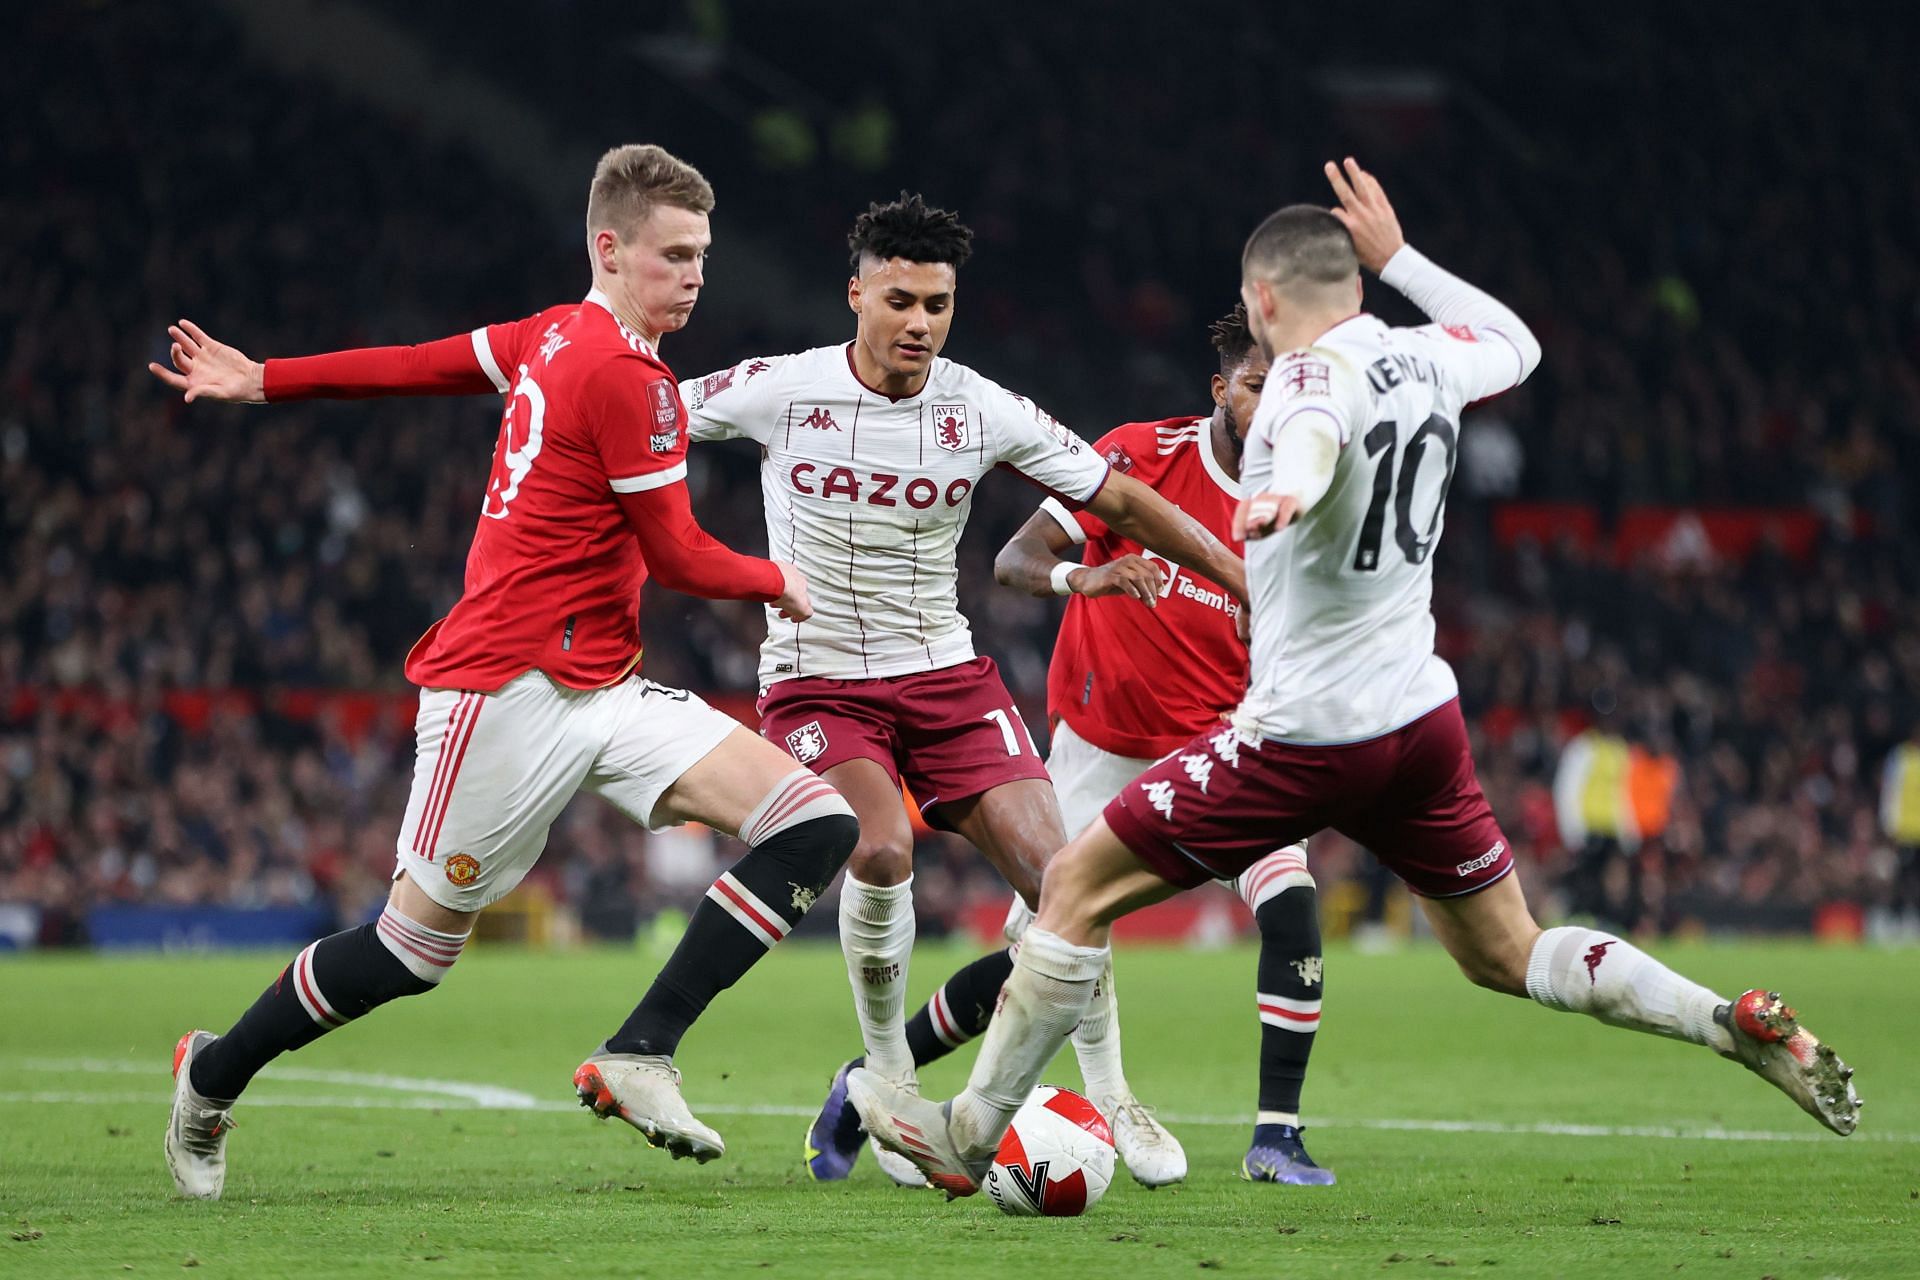 Fred and Scott McTominay tussling for the ball.